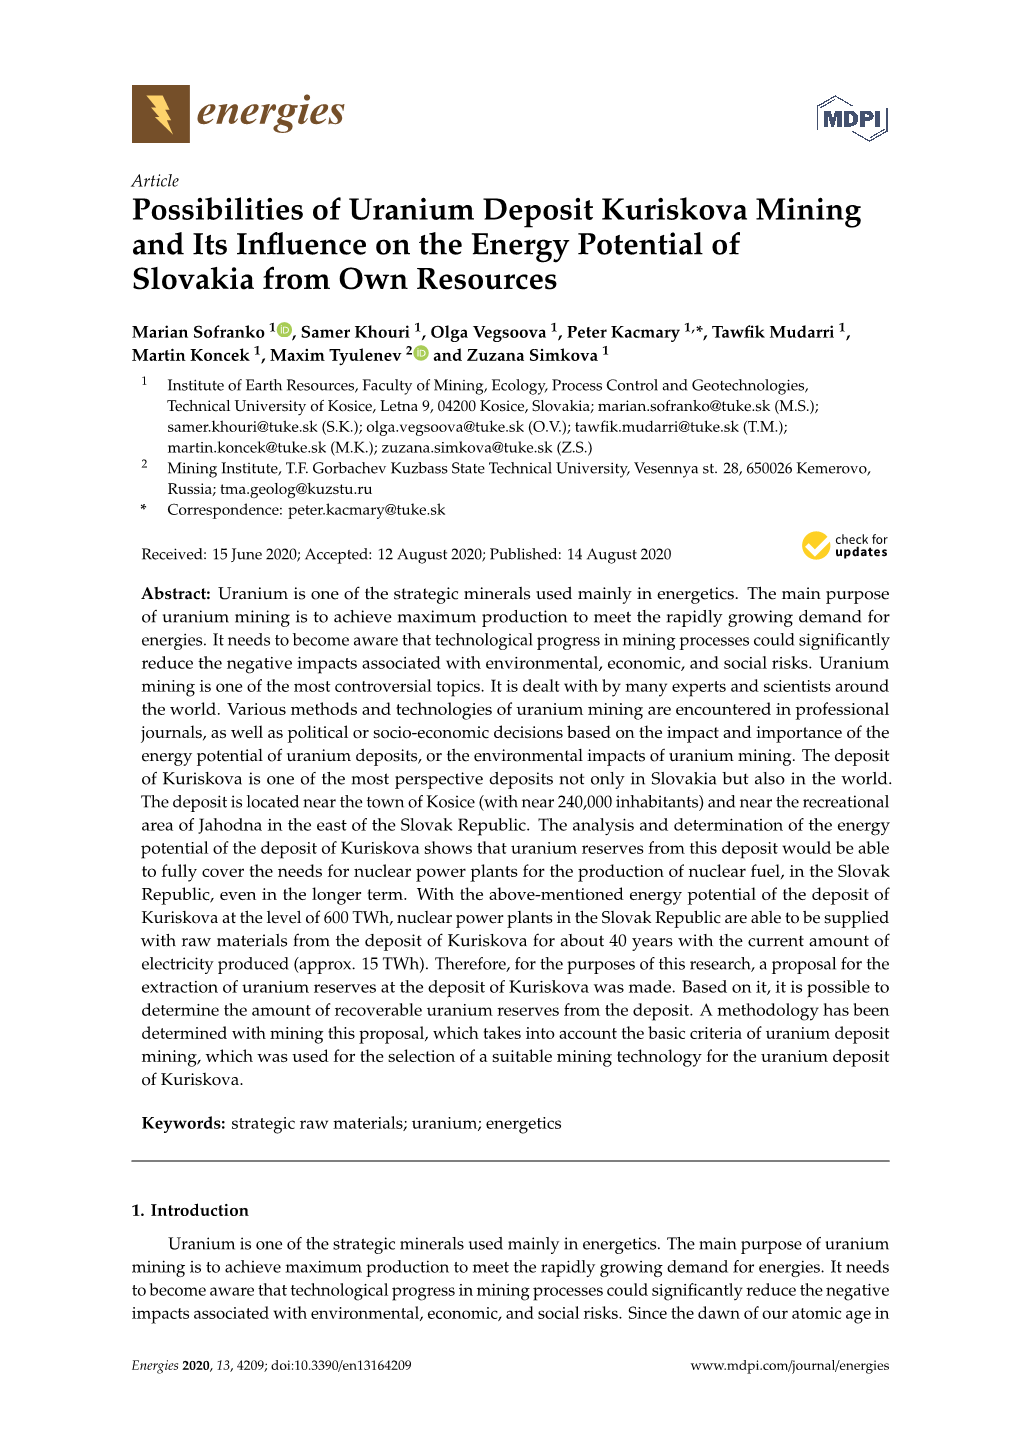 Possibilities of Uranium Deposit Kuriskova Mining and Its Inﬂuence on the Energy Potential of Slovakia from Own Resources